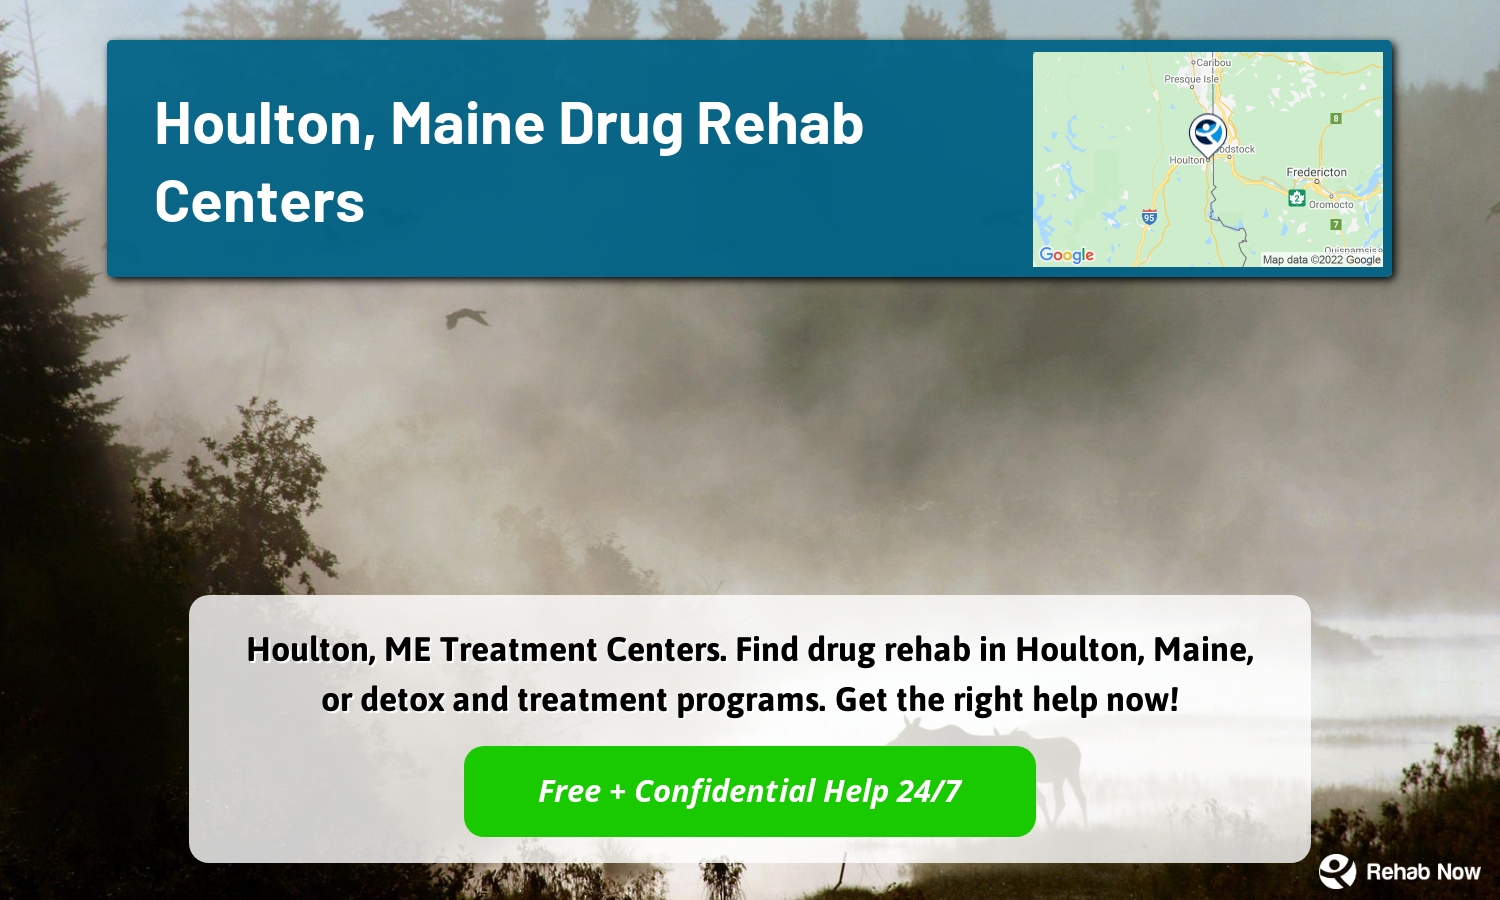 Houlton, ME Treatment Centers. Find drug rehab in Houlton, Maine, or detox and treatment programs. Get the right help now!